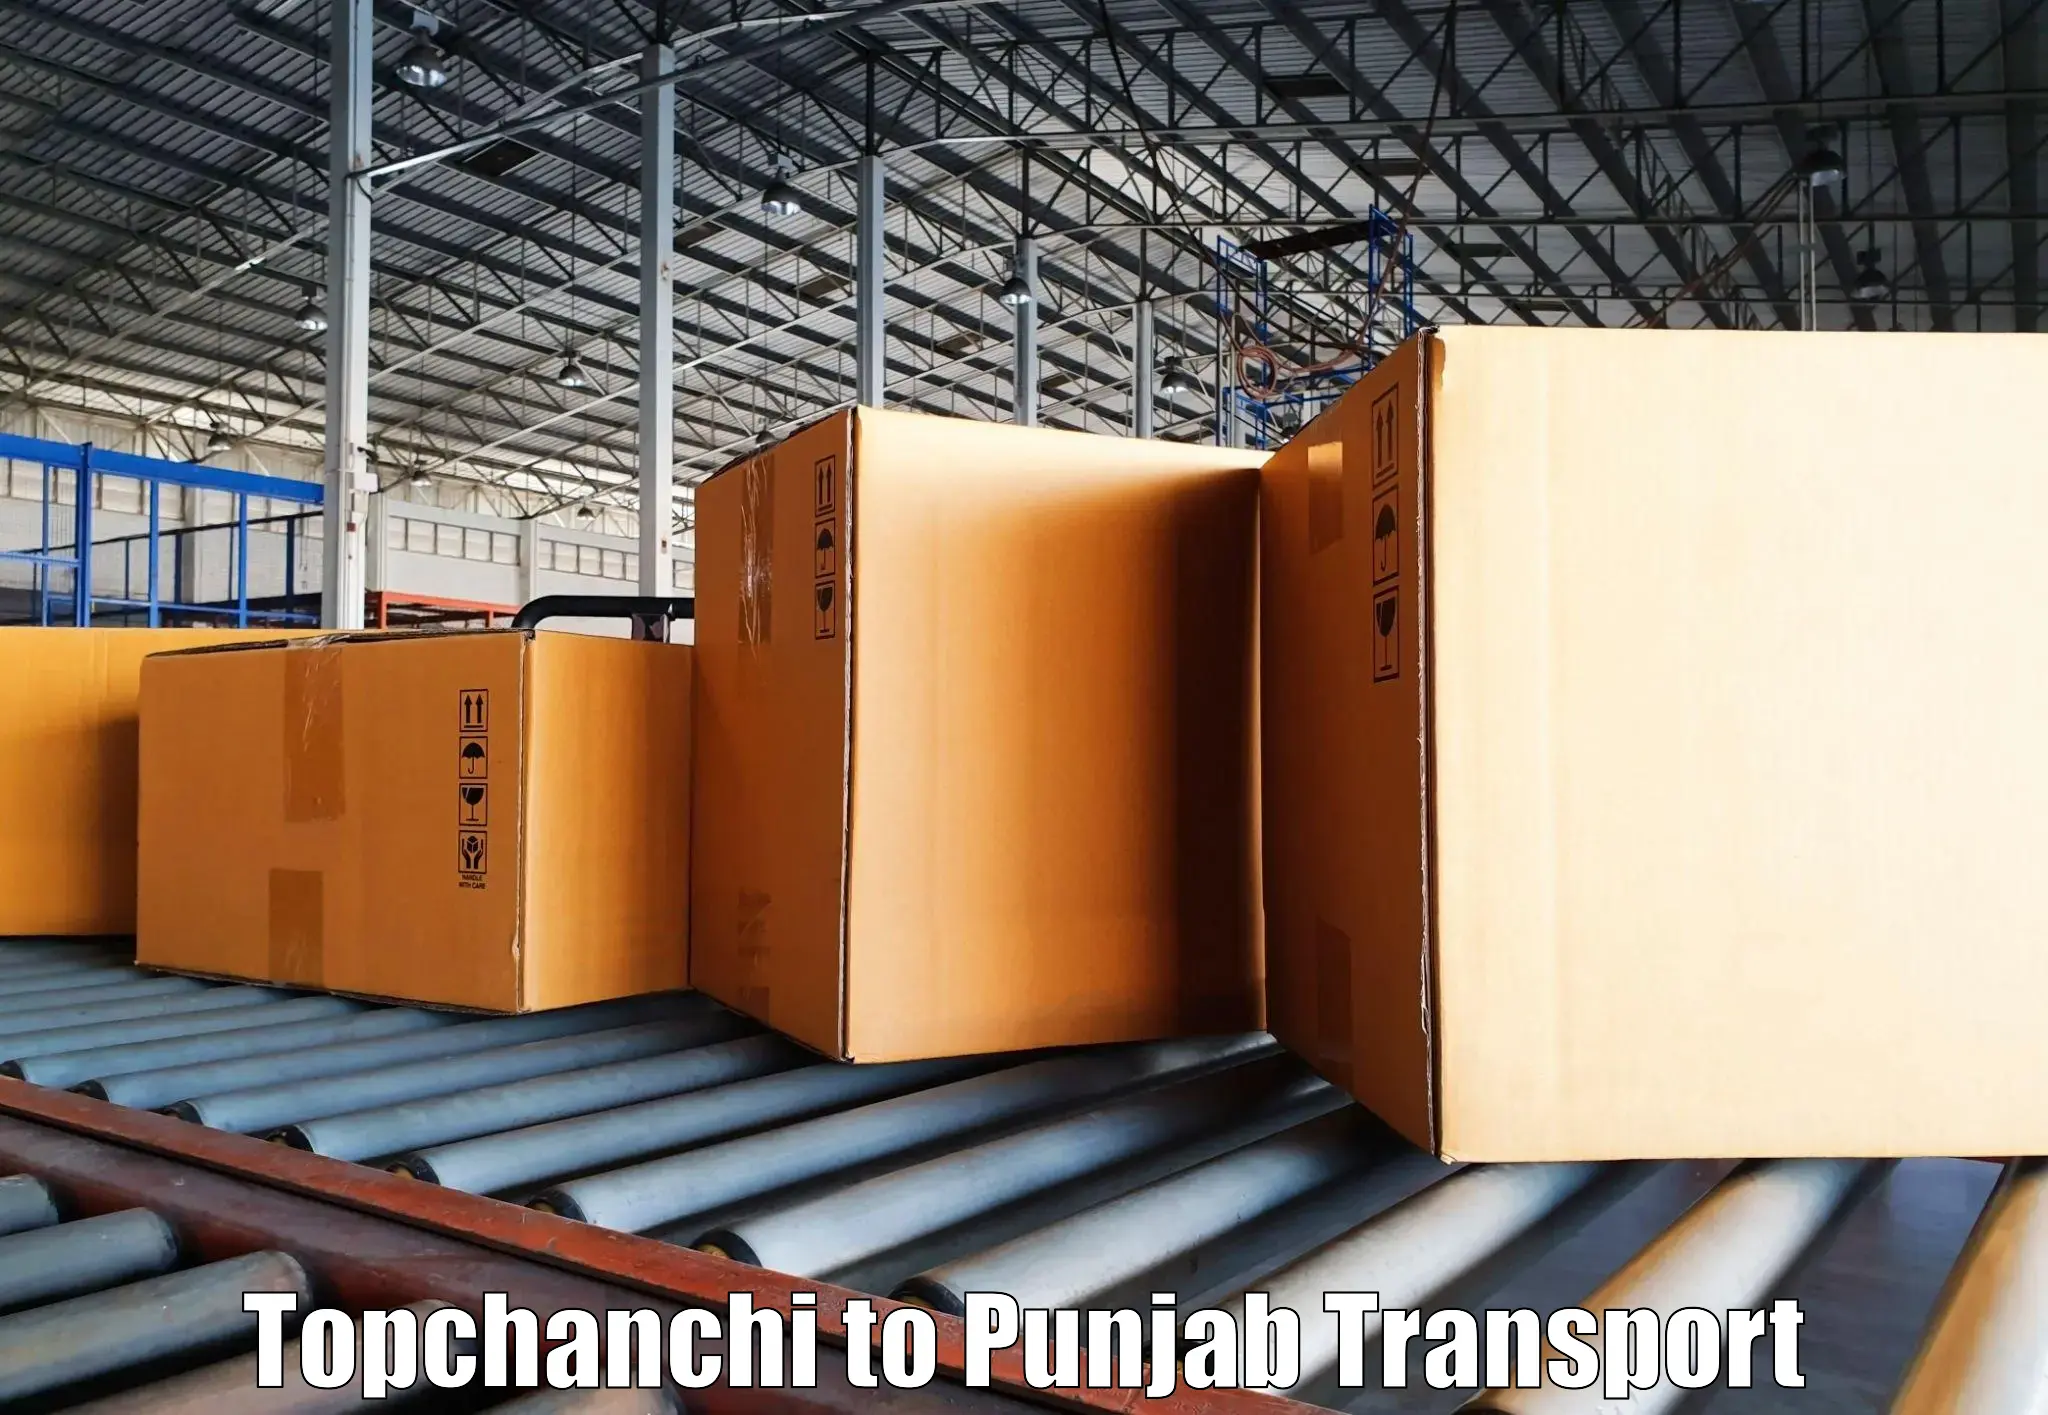 Two wheeler transport services Topchanchi to Mohali